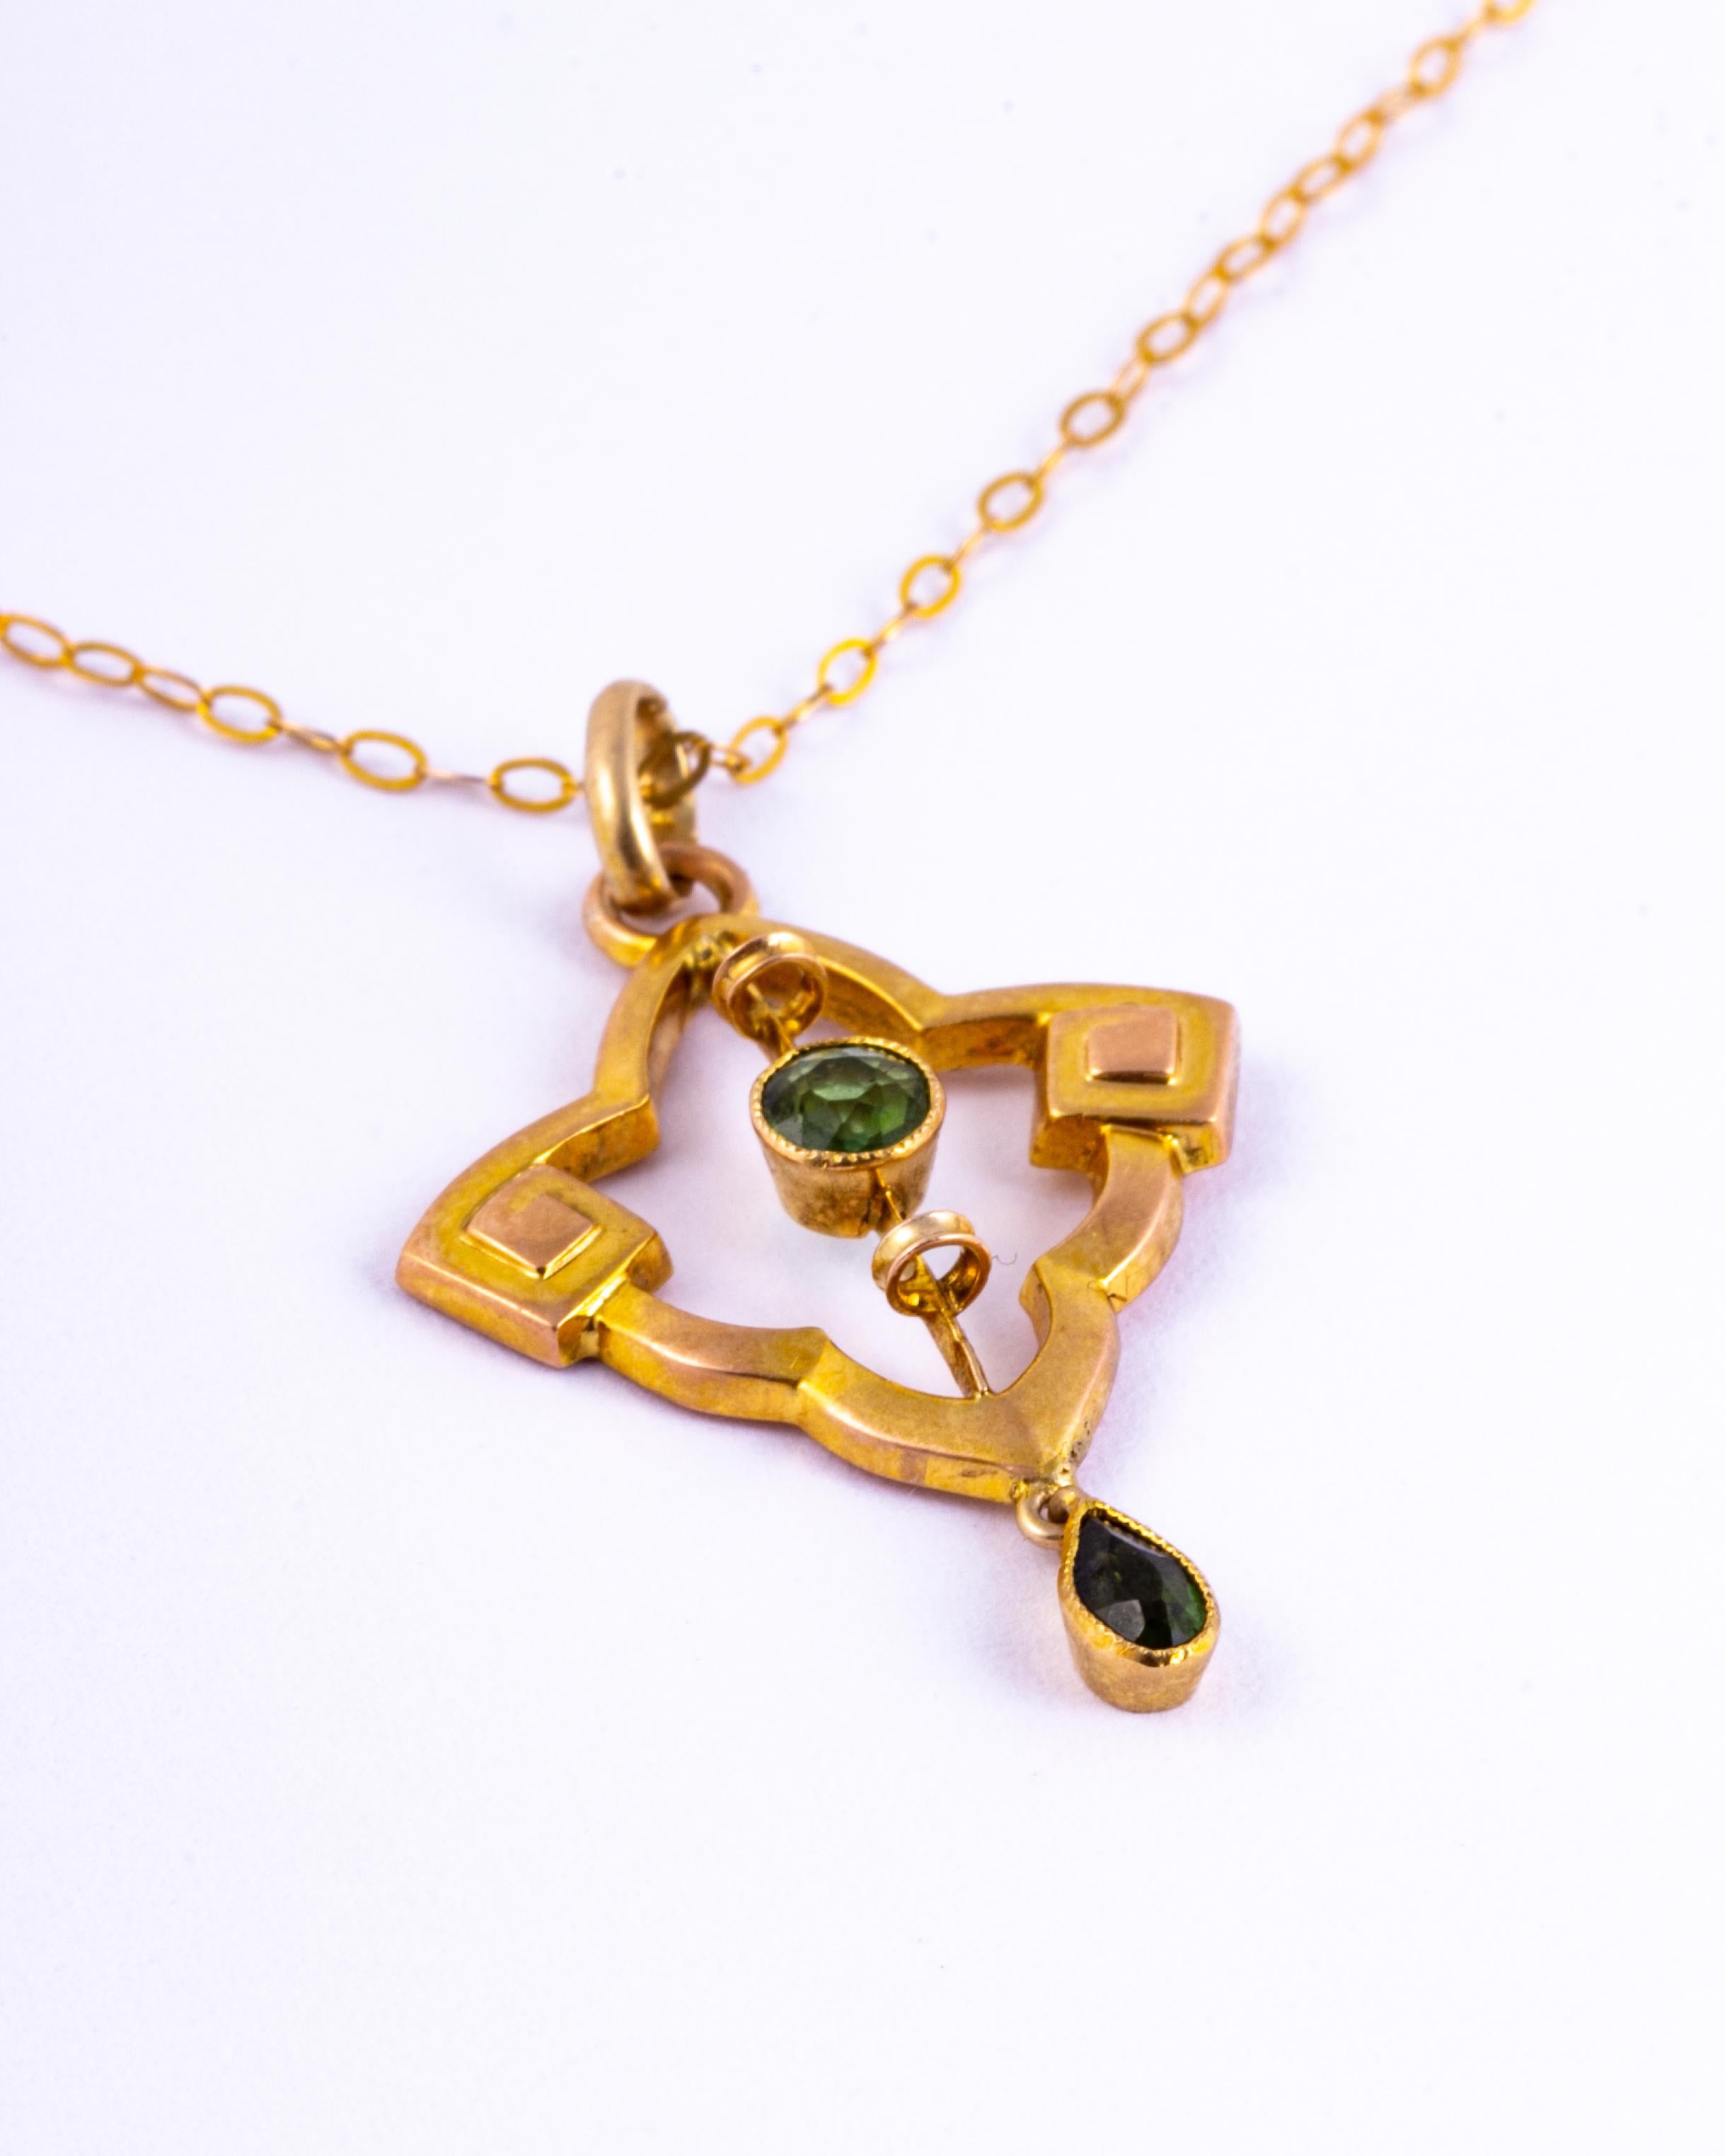 This sweet pendant holds two peridot stones totalling 40pts and is modelled  in 9ct gold. 

Pendand dimensions: 30x20mm
Chain Length: 41cm 

Weight: 1.4g